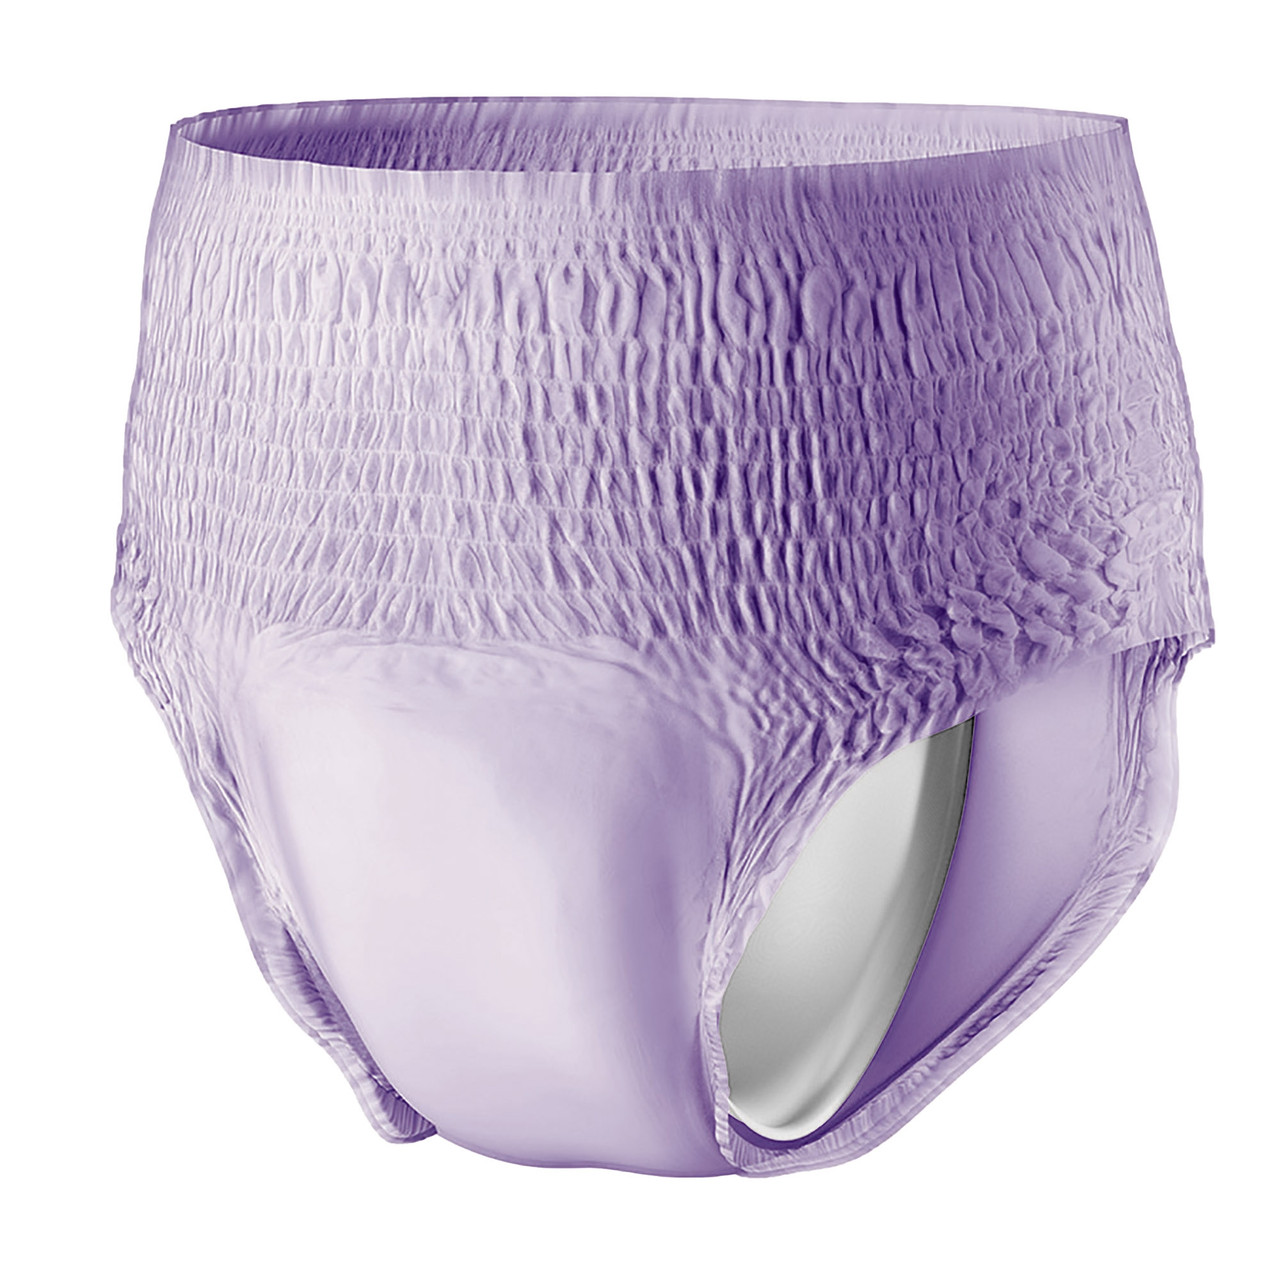 Prevail Women's Daily Incontinence Underwear, Maximum Absorbency - Size  Large - Simply Medical